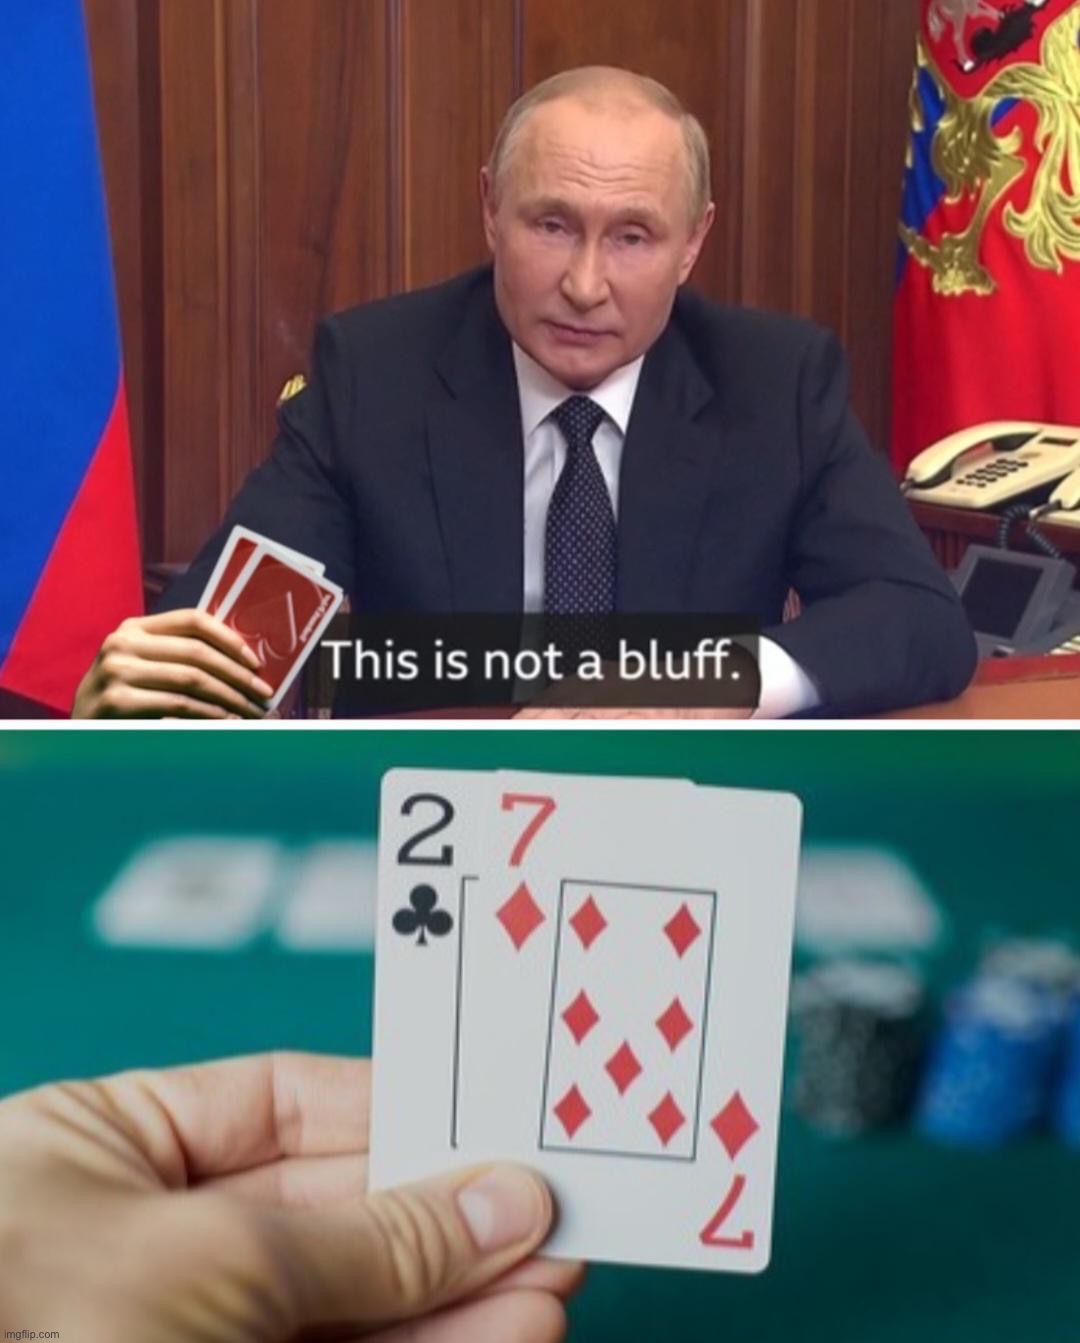 Putin this is not a bluff | image tagged in putin this is not a bluff | made w/ Imgflip meme maker